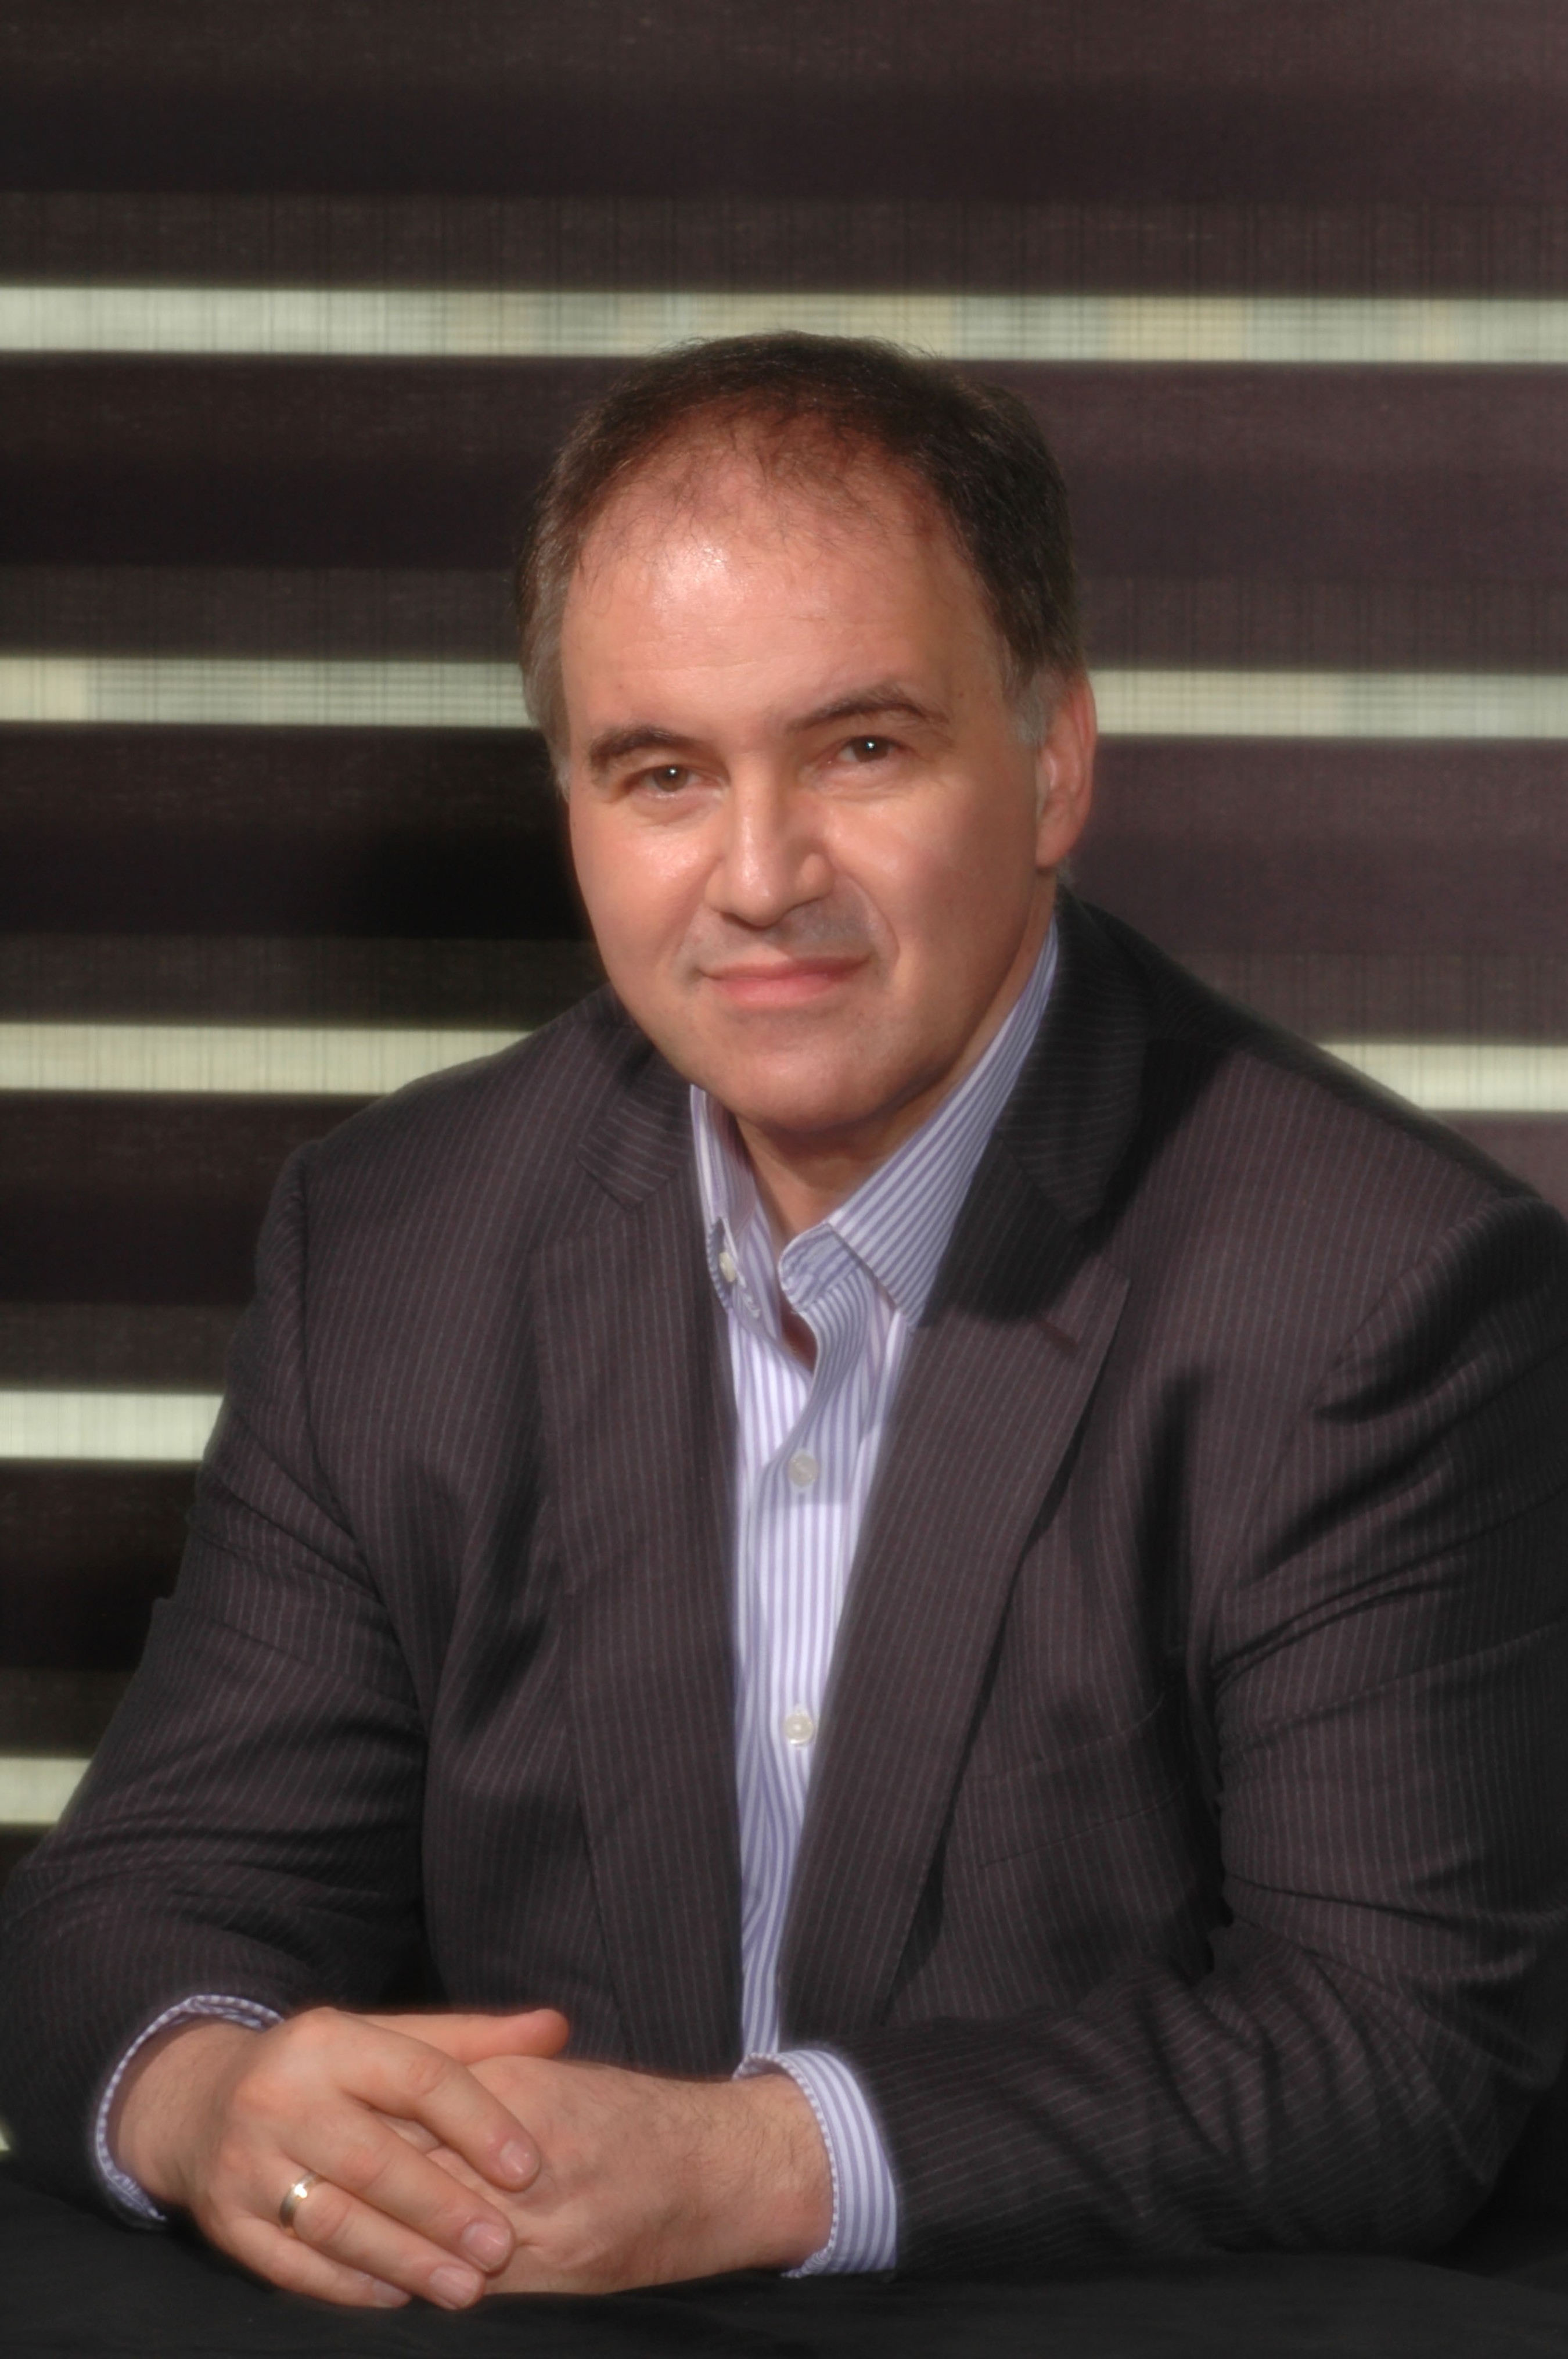 Dr John Sampalis, CEO and chief scientific officer